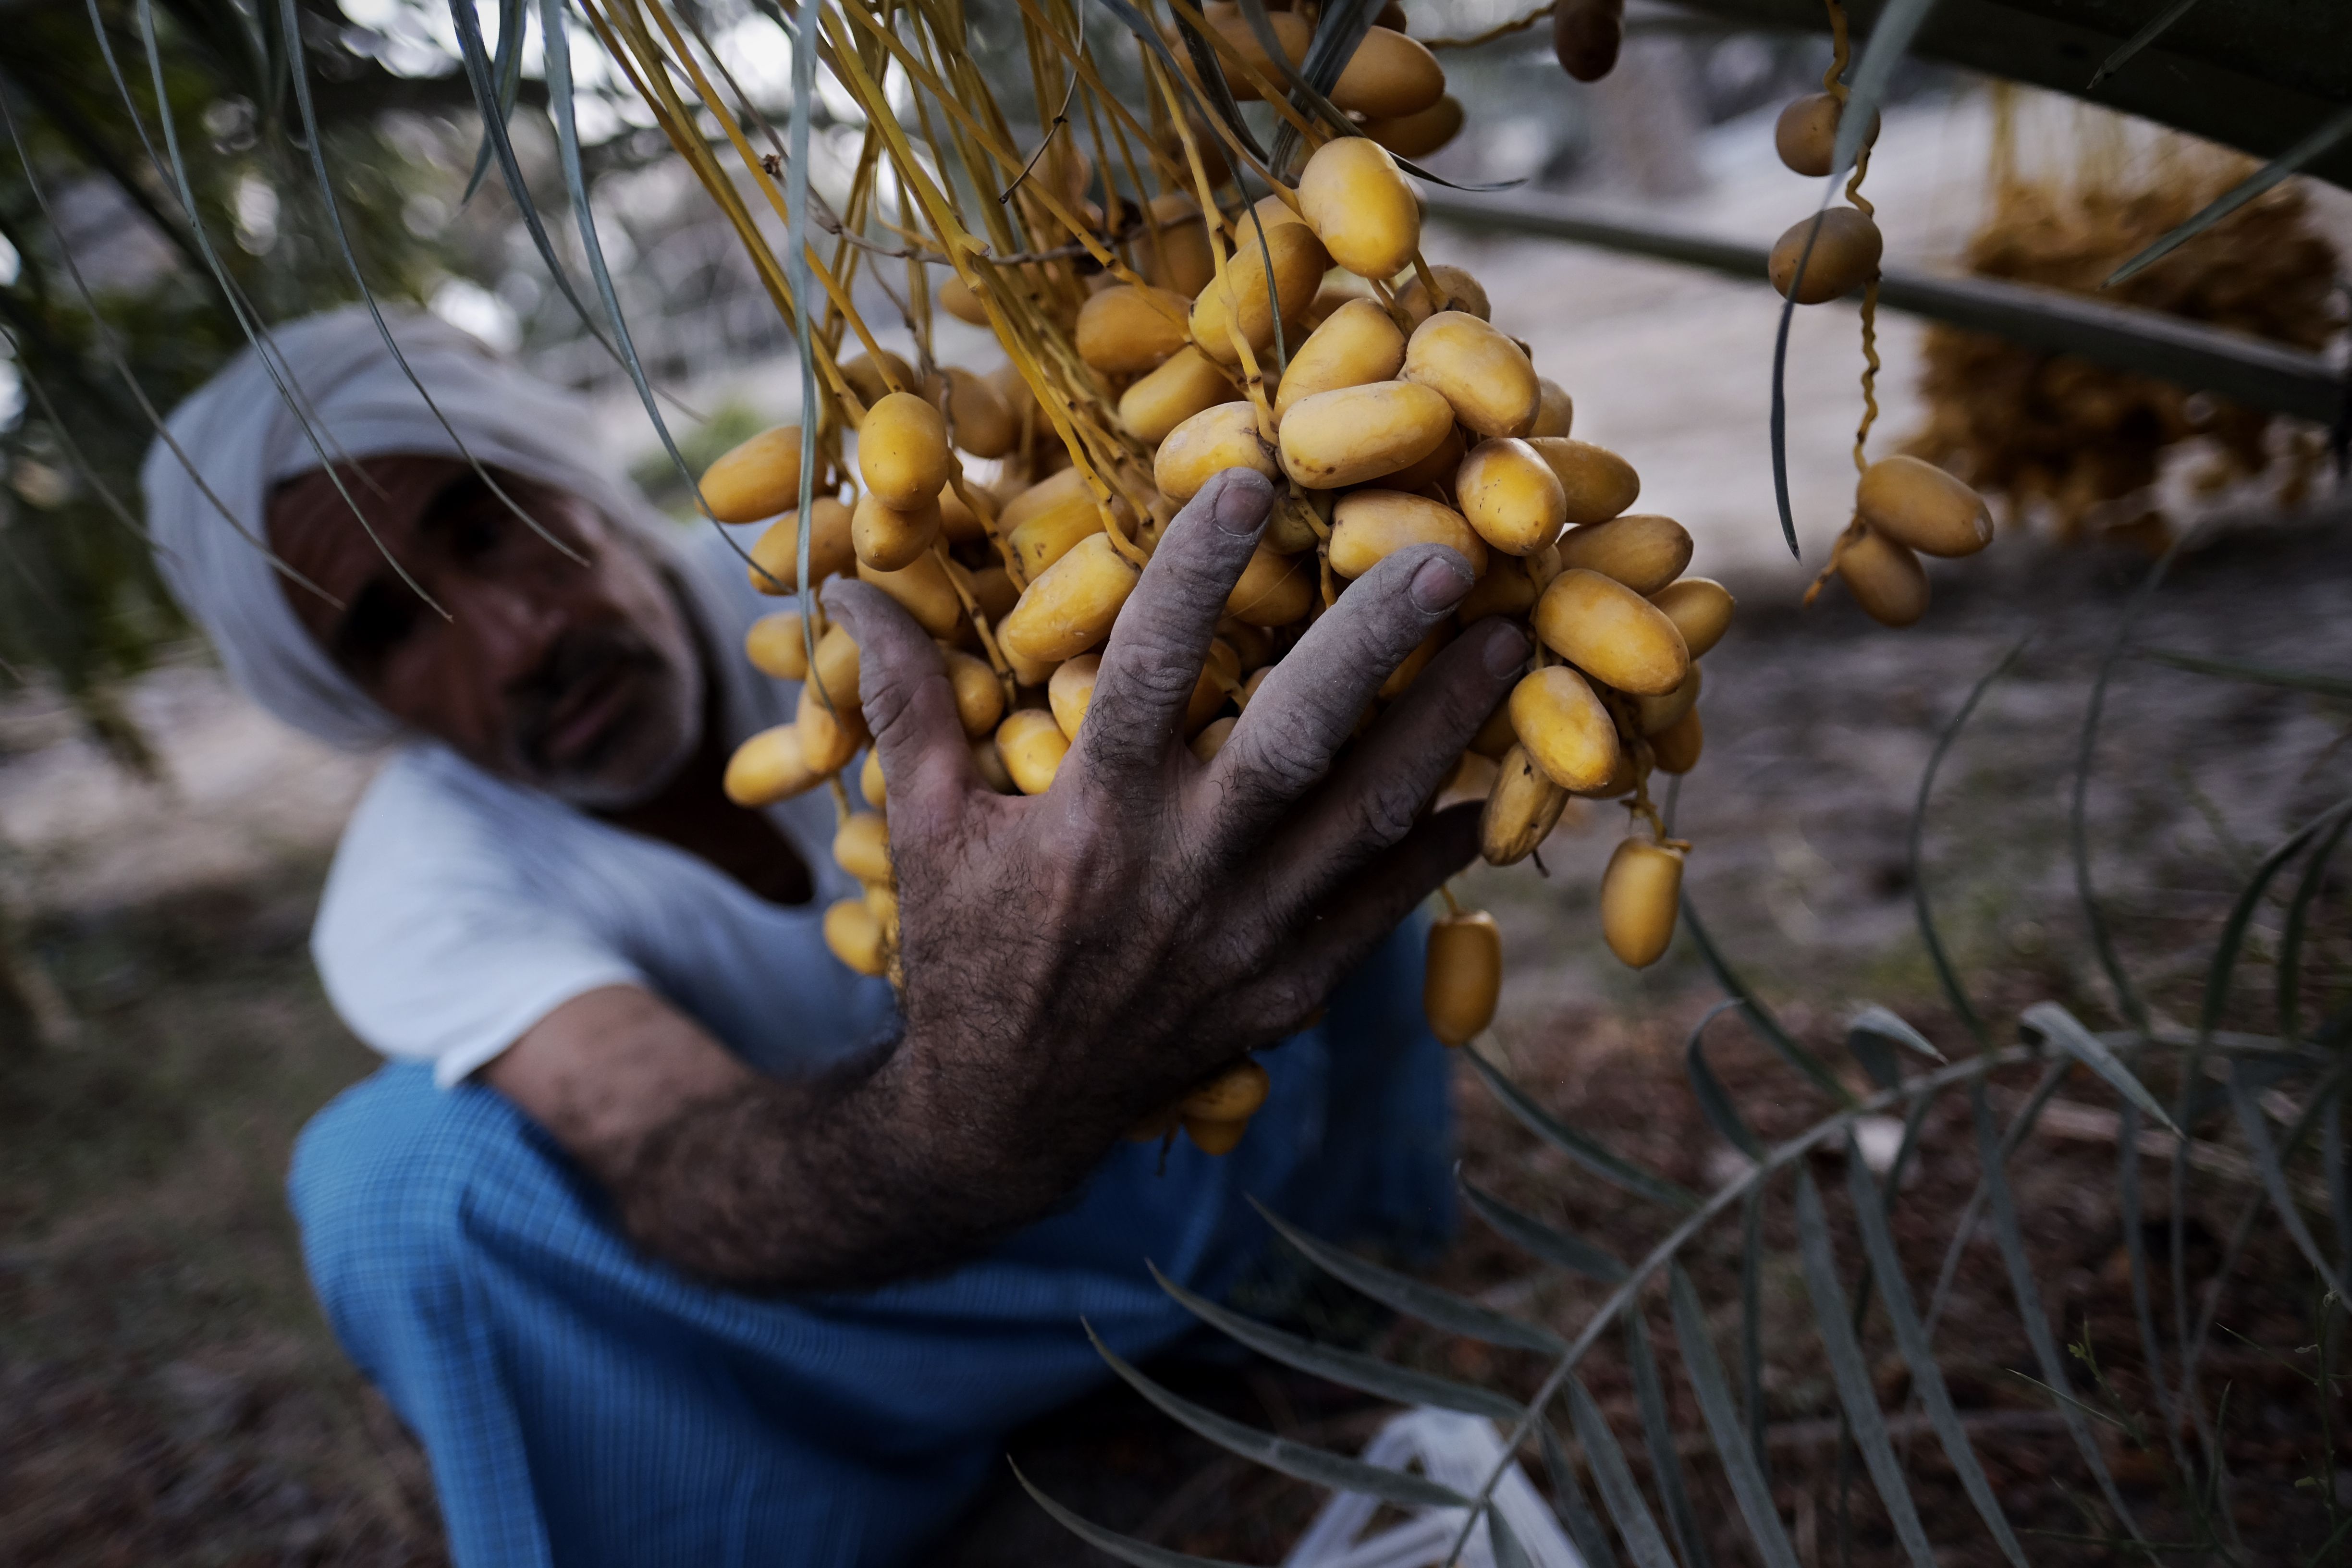 A Bahraini farmer harvests dates at his farm on July 11, 2016, in the village of Bori, south of the capital Manama. Photo by MOHAMMED AL-SHAIKH/AFP via Getty Images.